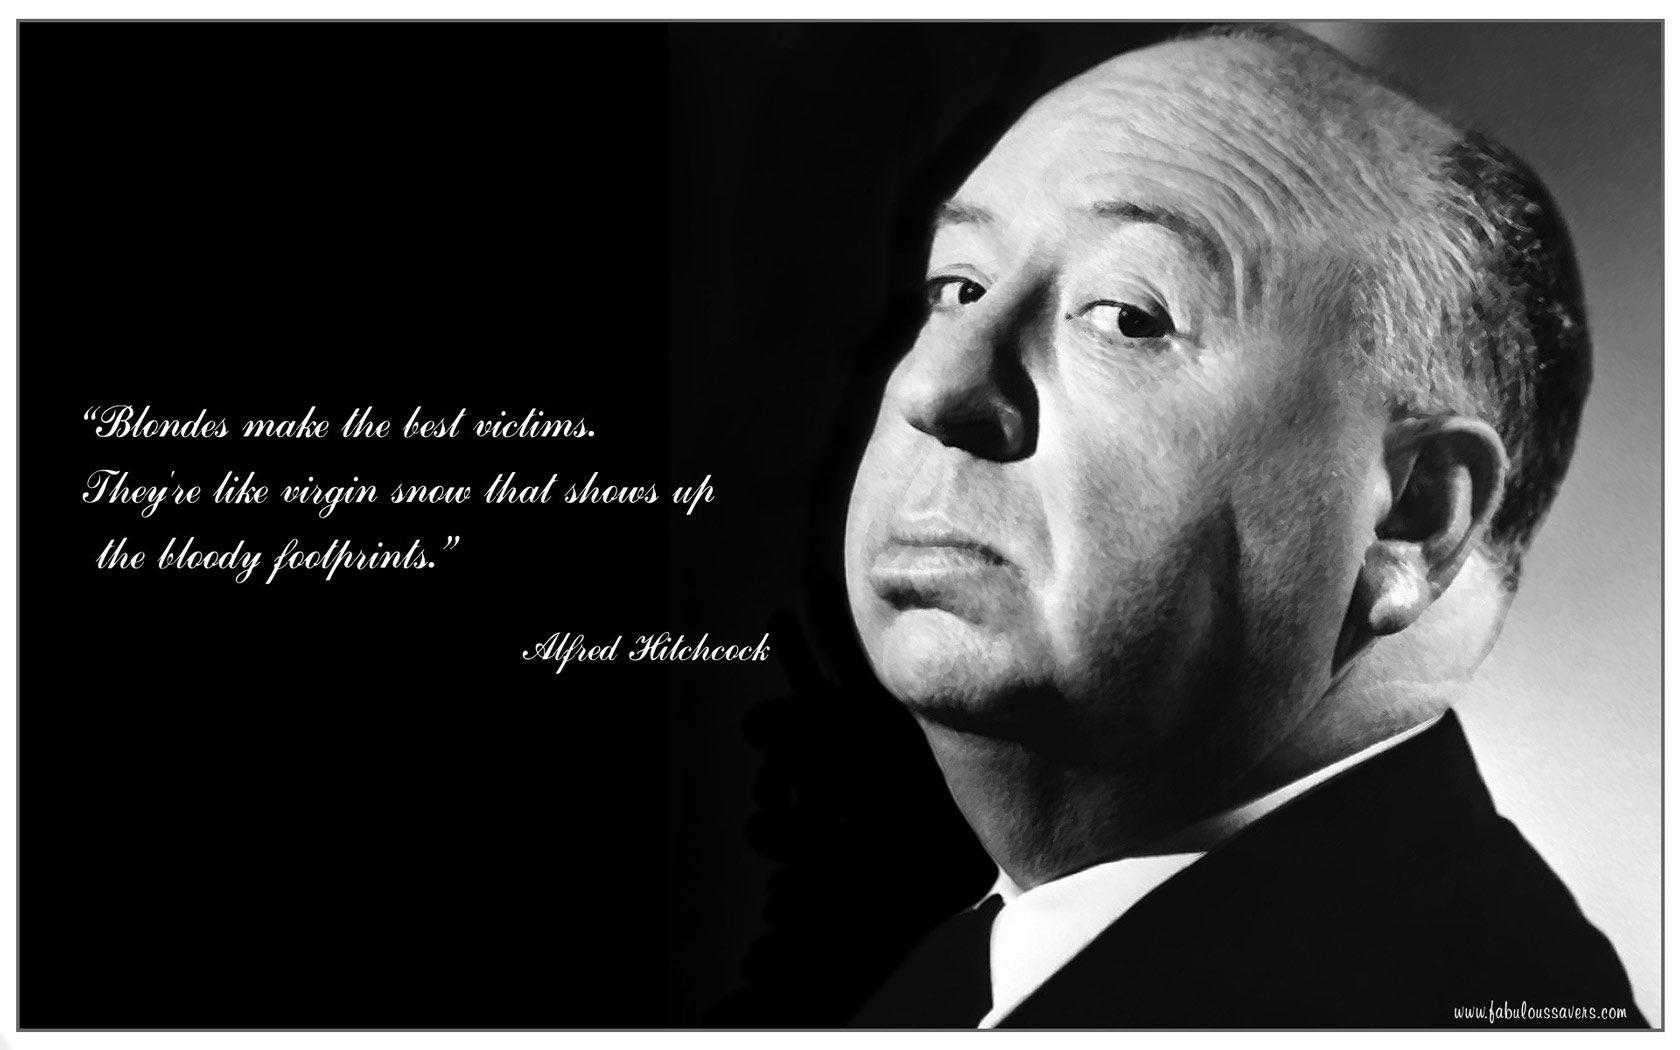 Alfred Hitchcock Wallpaper 15 X 1050